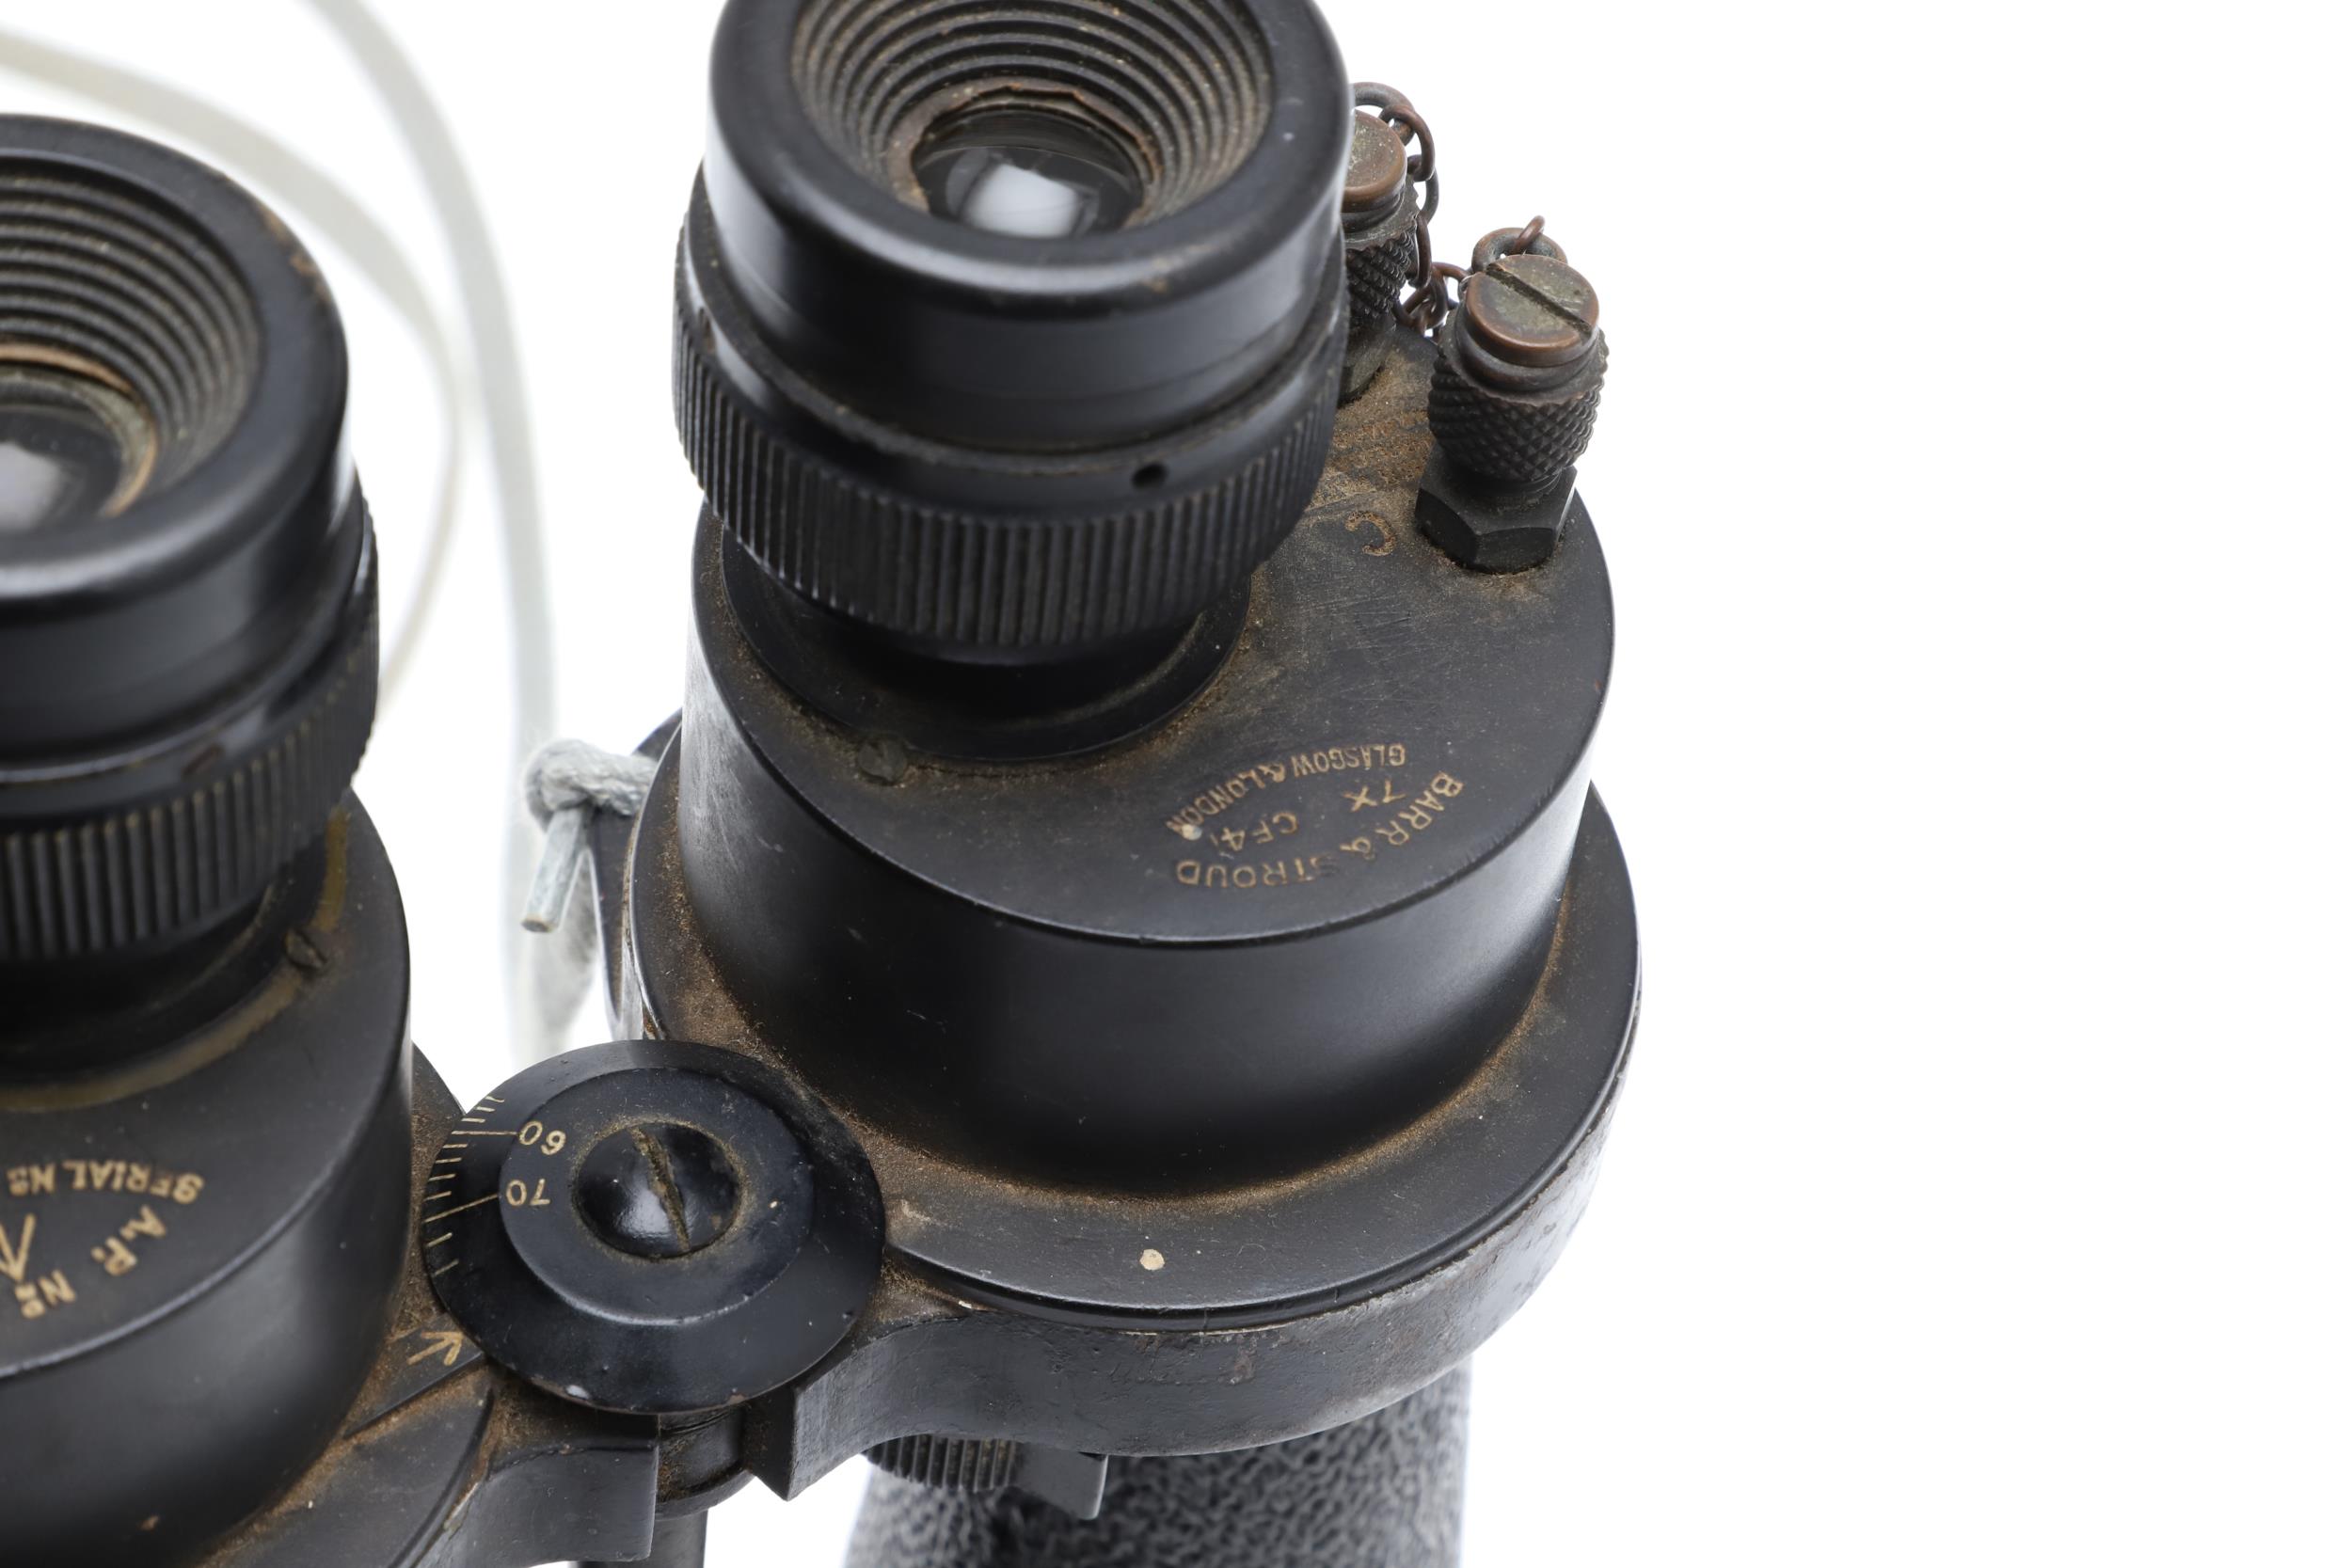 A PAIR OF SECOND WORLD WAR NAVAL BINOCULARS BY BARR AND STROUD. - Image 5 of 12